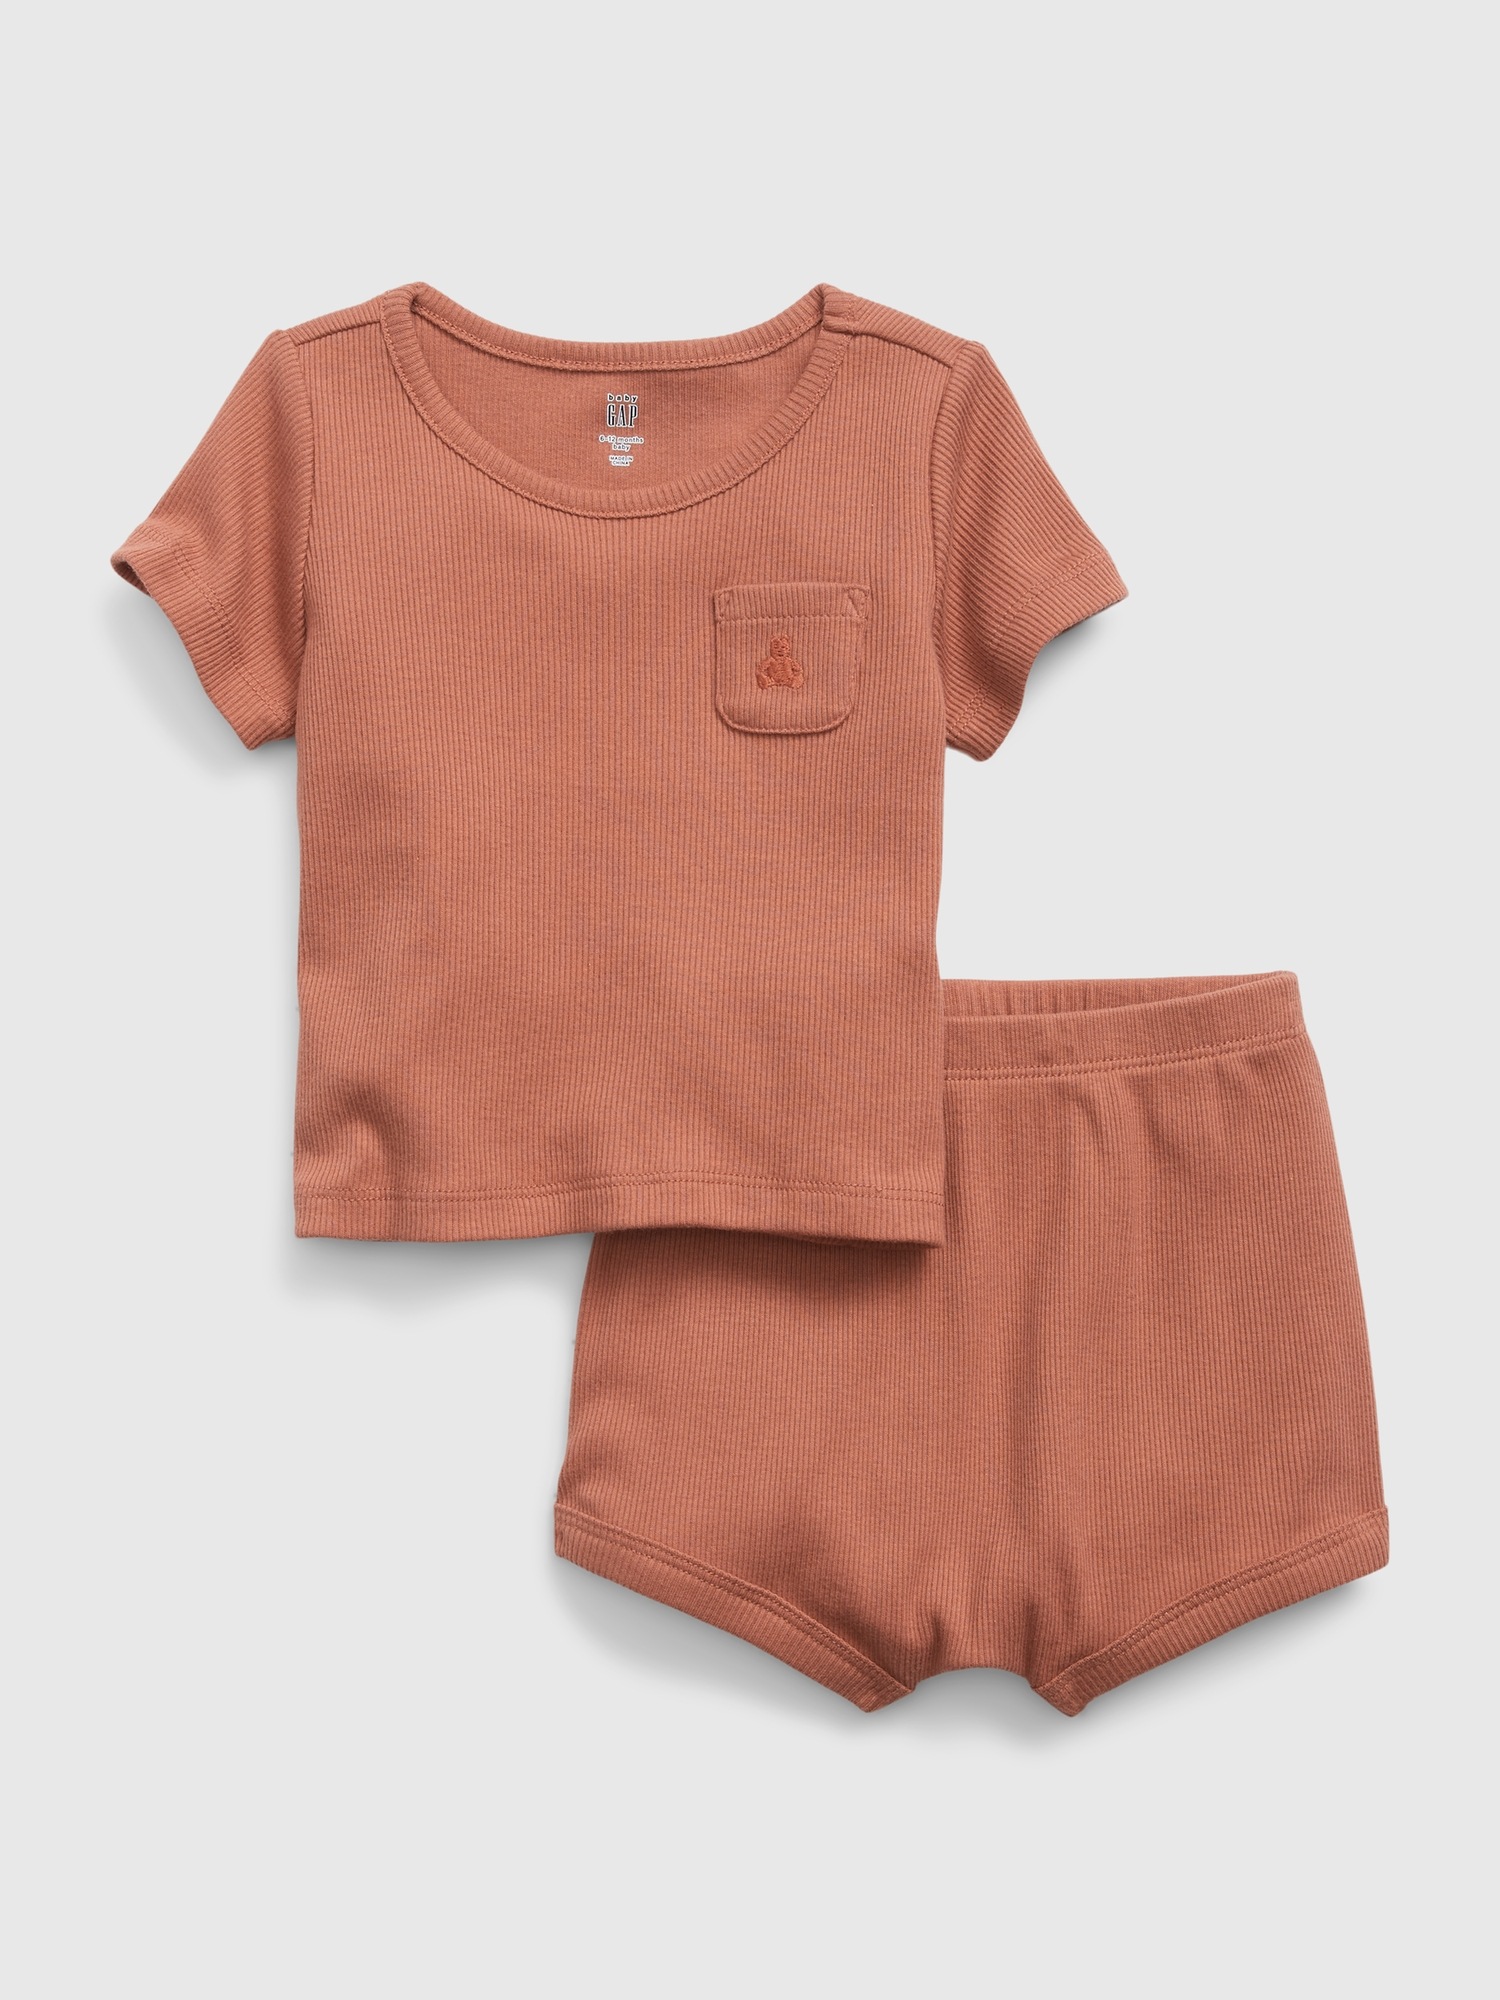 Gap Baby Rib 2-Piece Outfit Set brown. 1